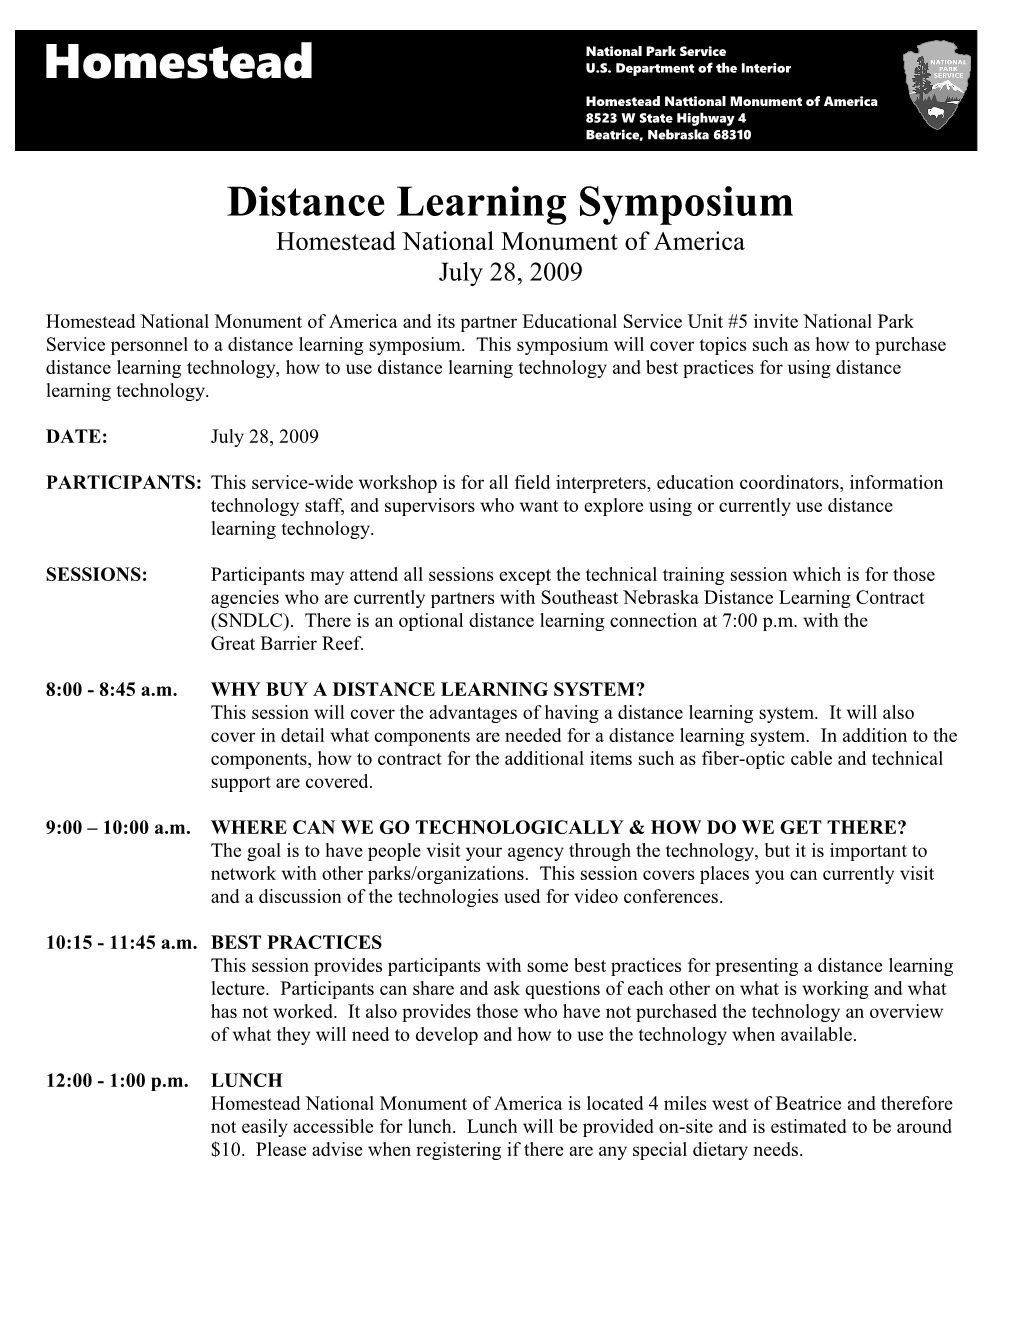 Distance Learning Symposium